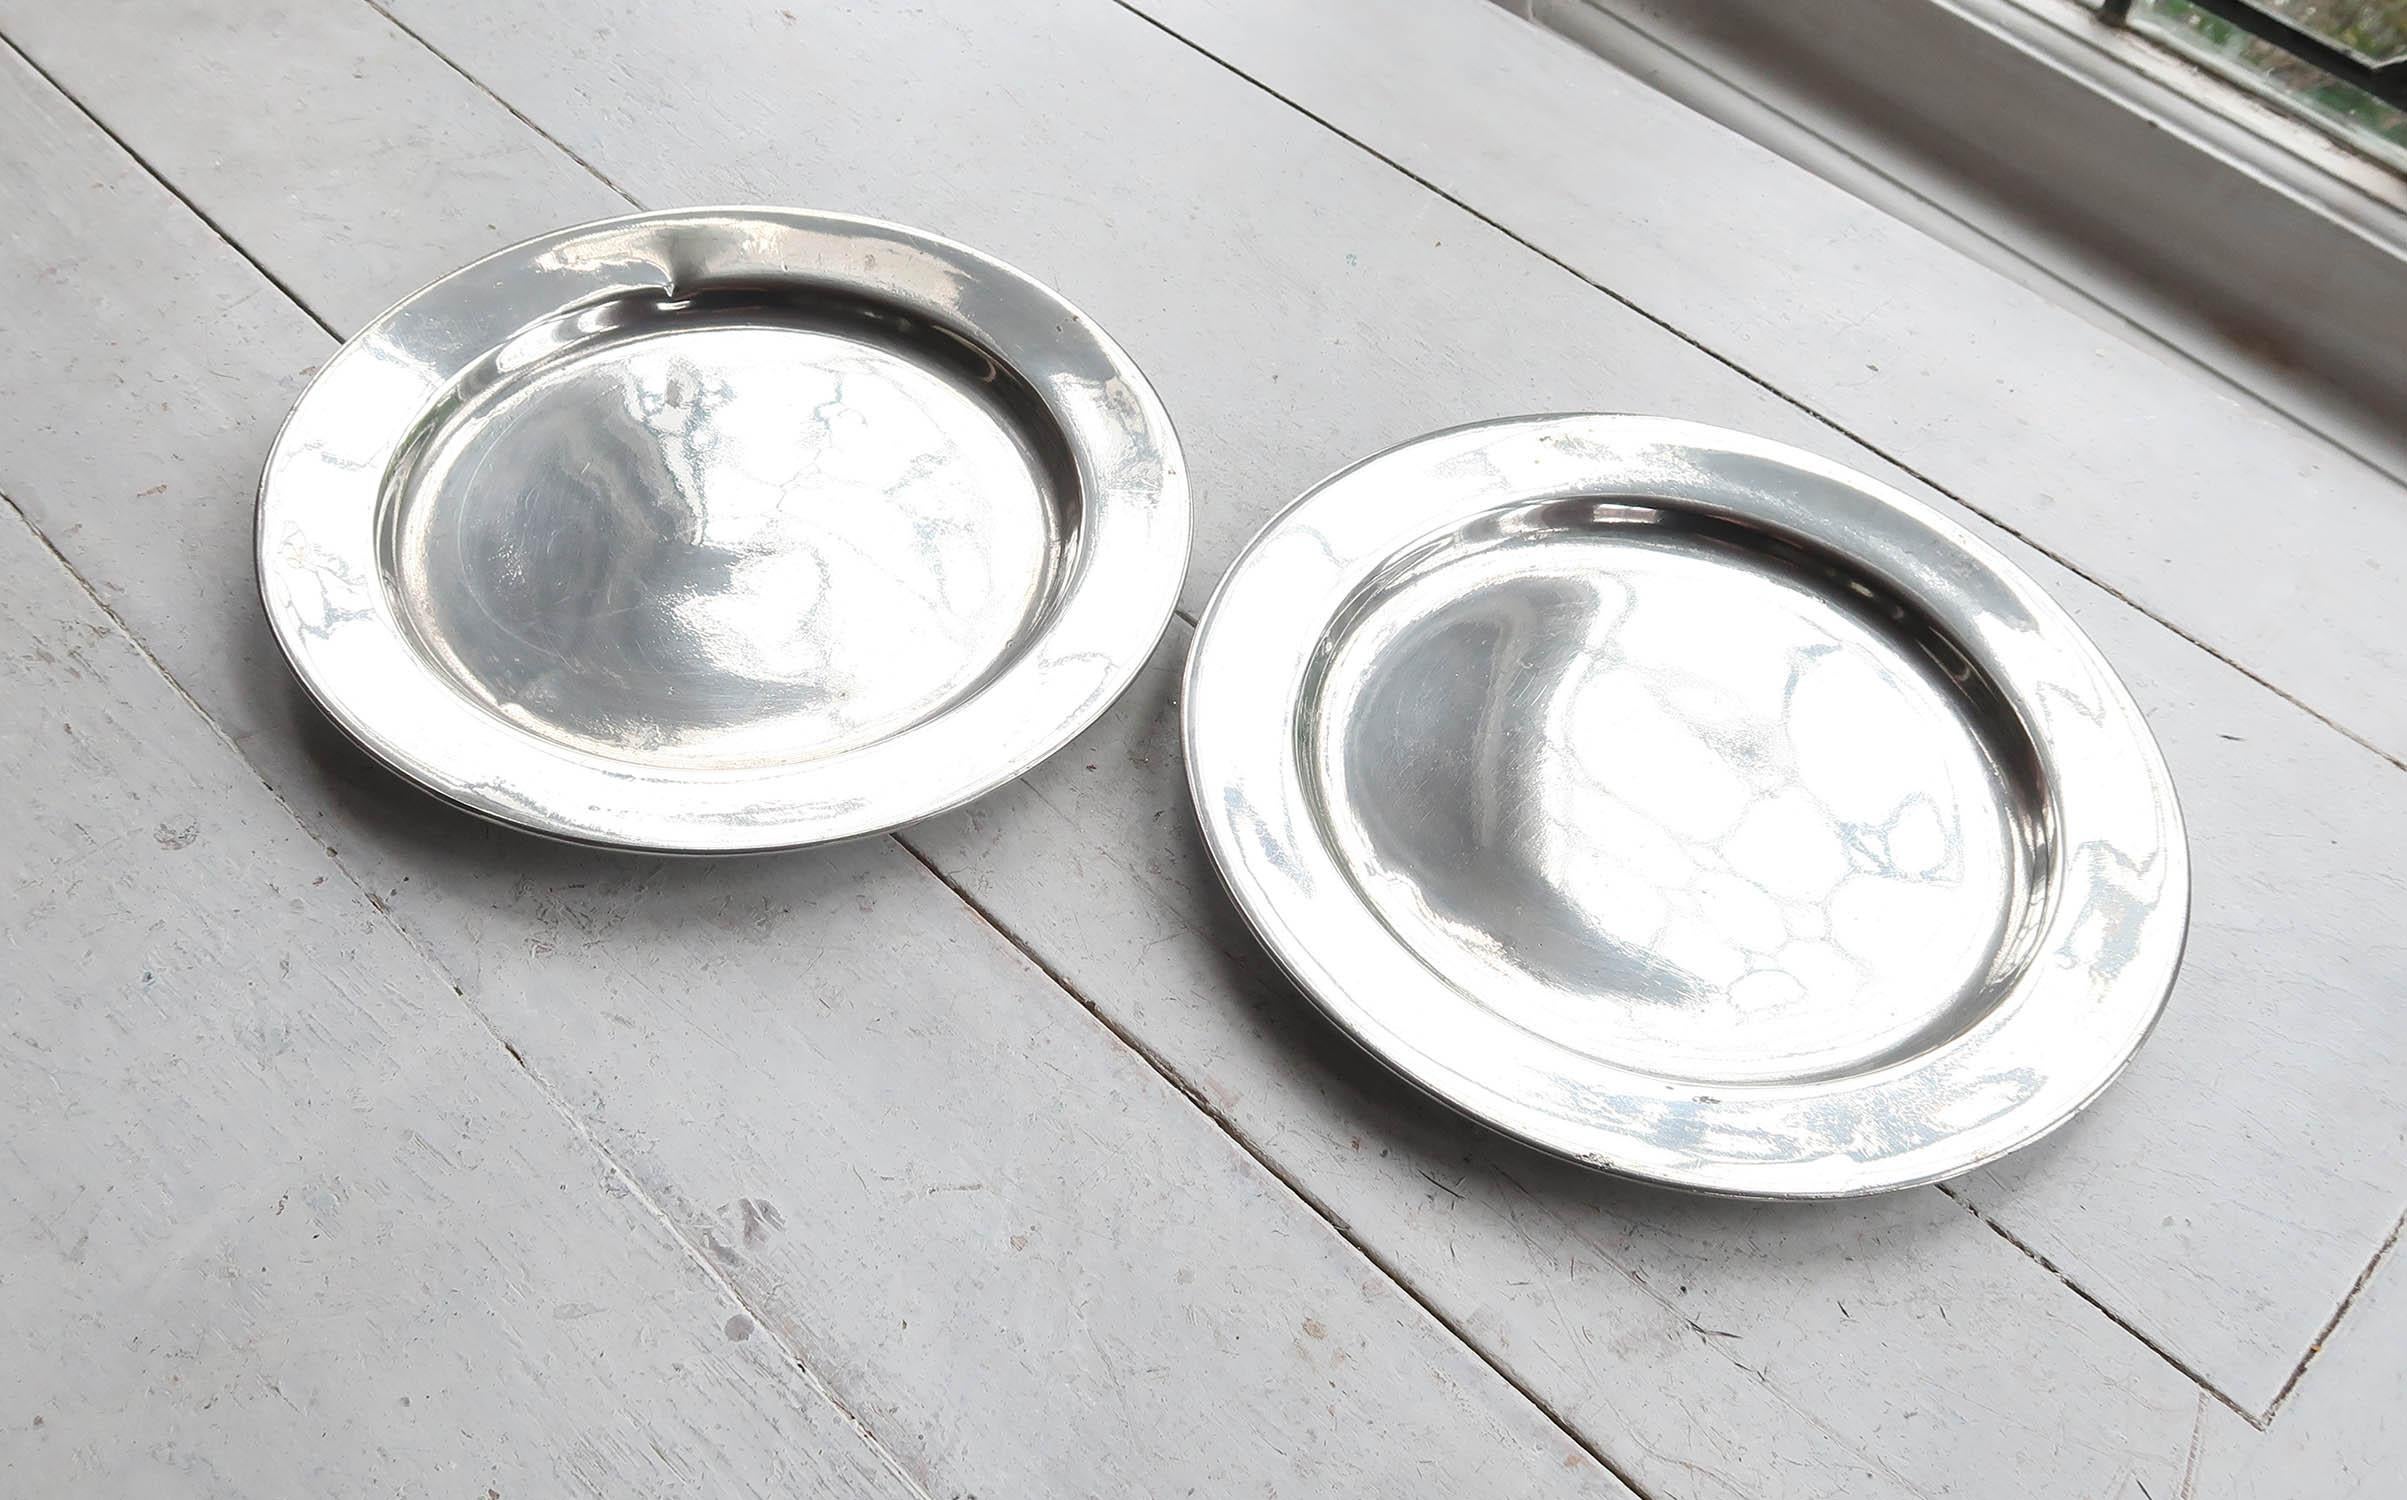 Lovely pair of highly polished pewter plates.

The pewter has been polished to its original shine to imitate polished silver. It was known as the Poor Man's Silver.

The great thing about polished pewter is that it will retain its shine unlike